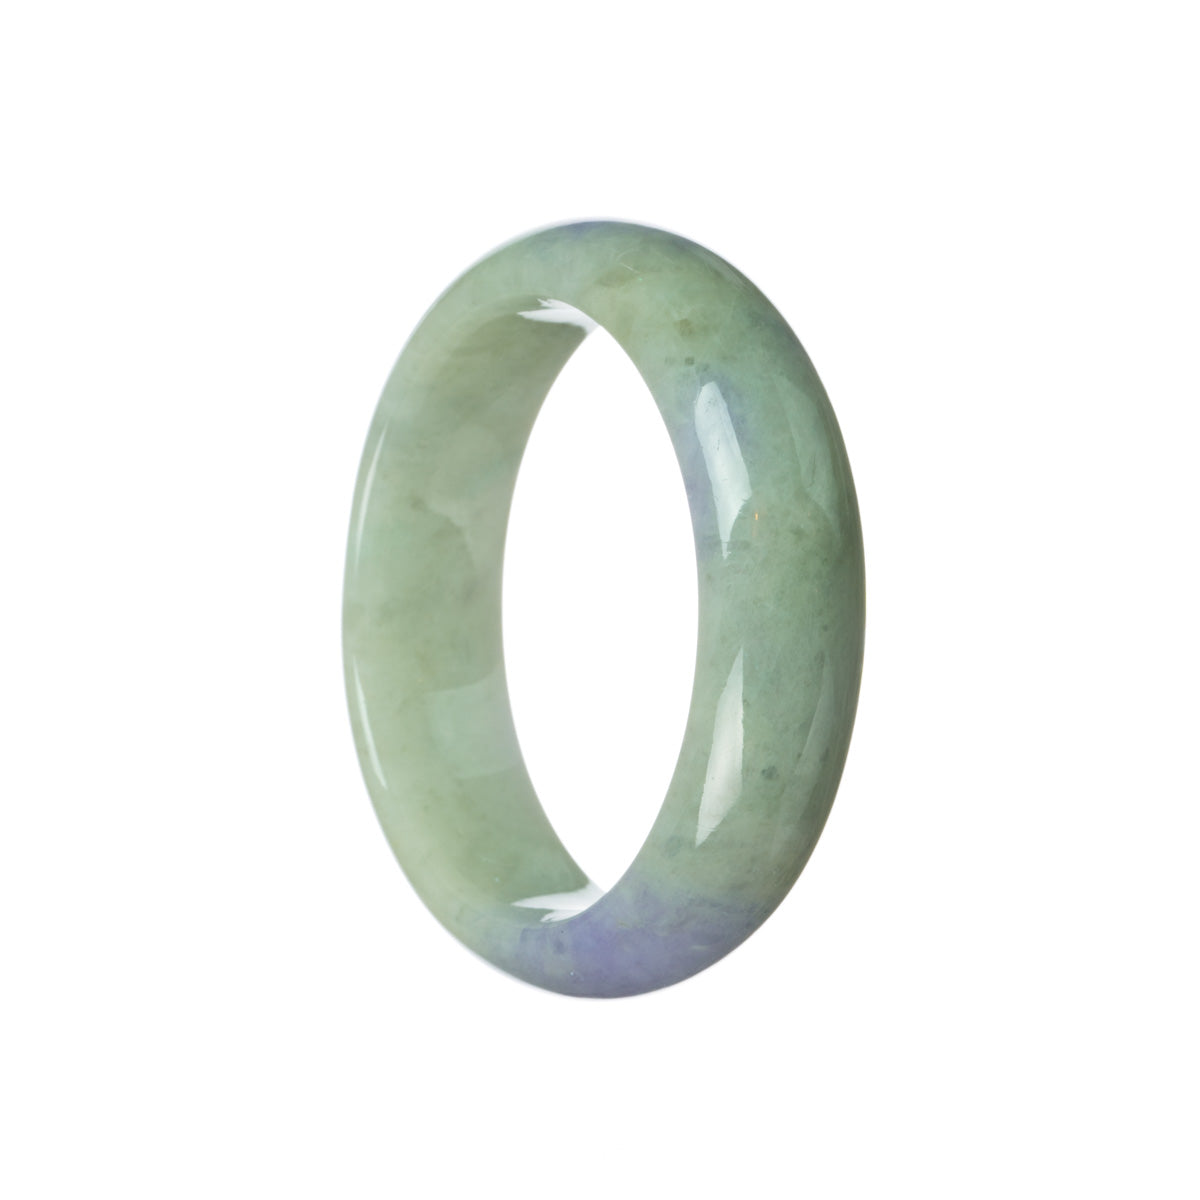 Certified Natural Green with lavender Traditional Jade Bangle Bracelet - 57mm Half Moon